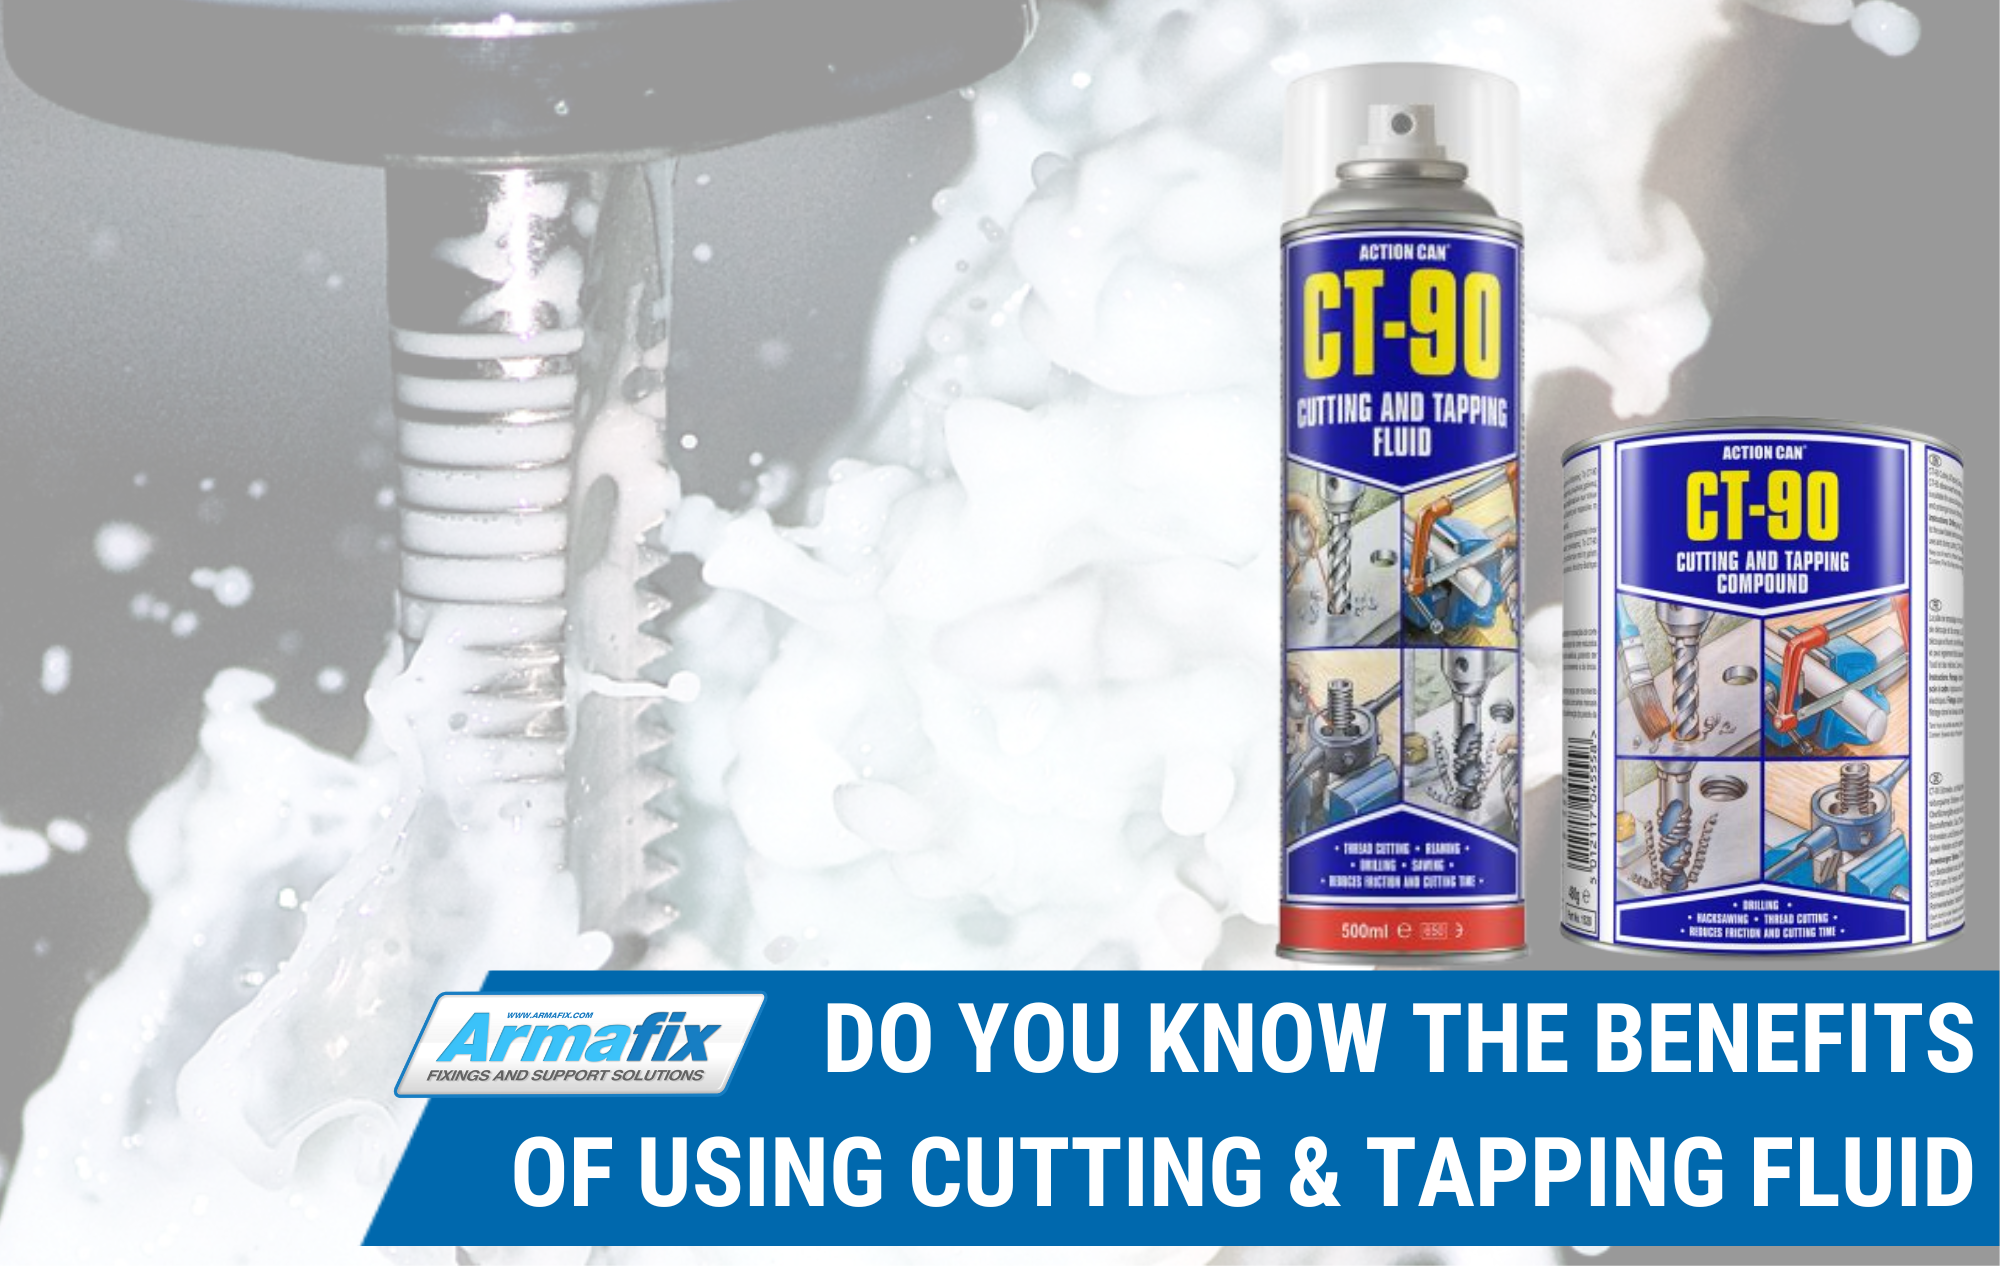 The Benefits of using Cutting & Tapping Fluid